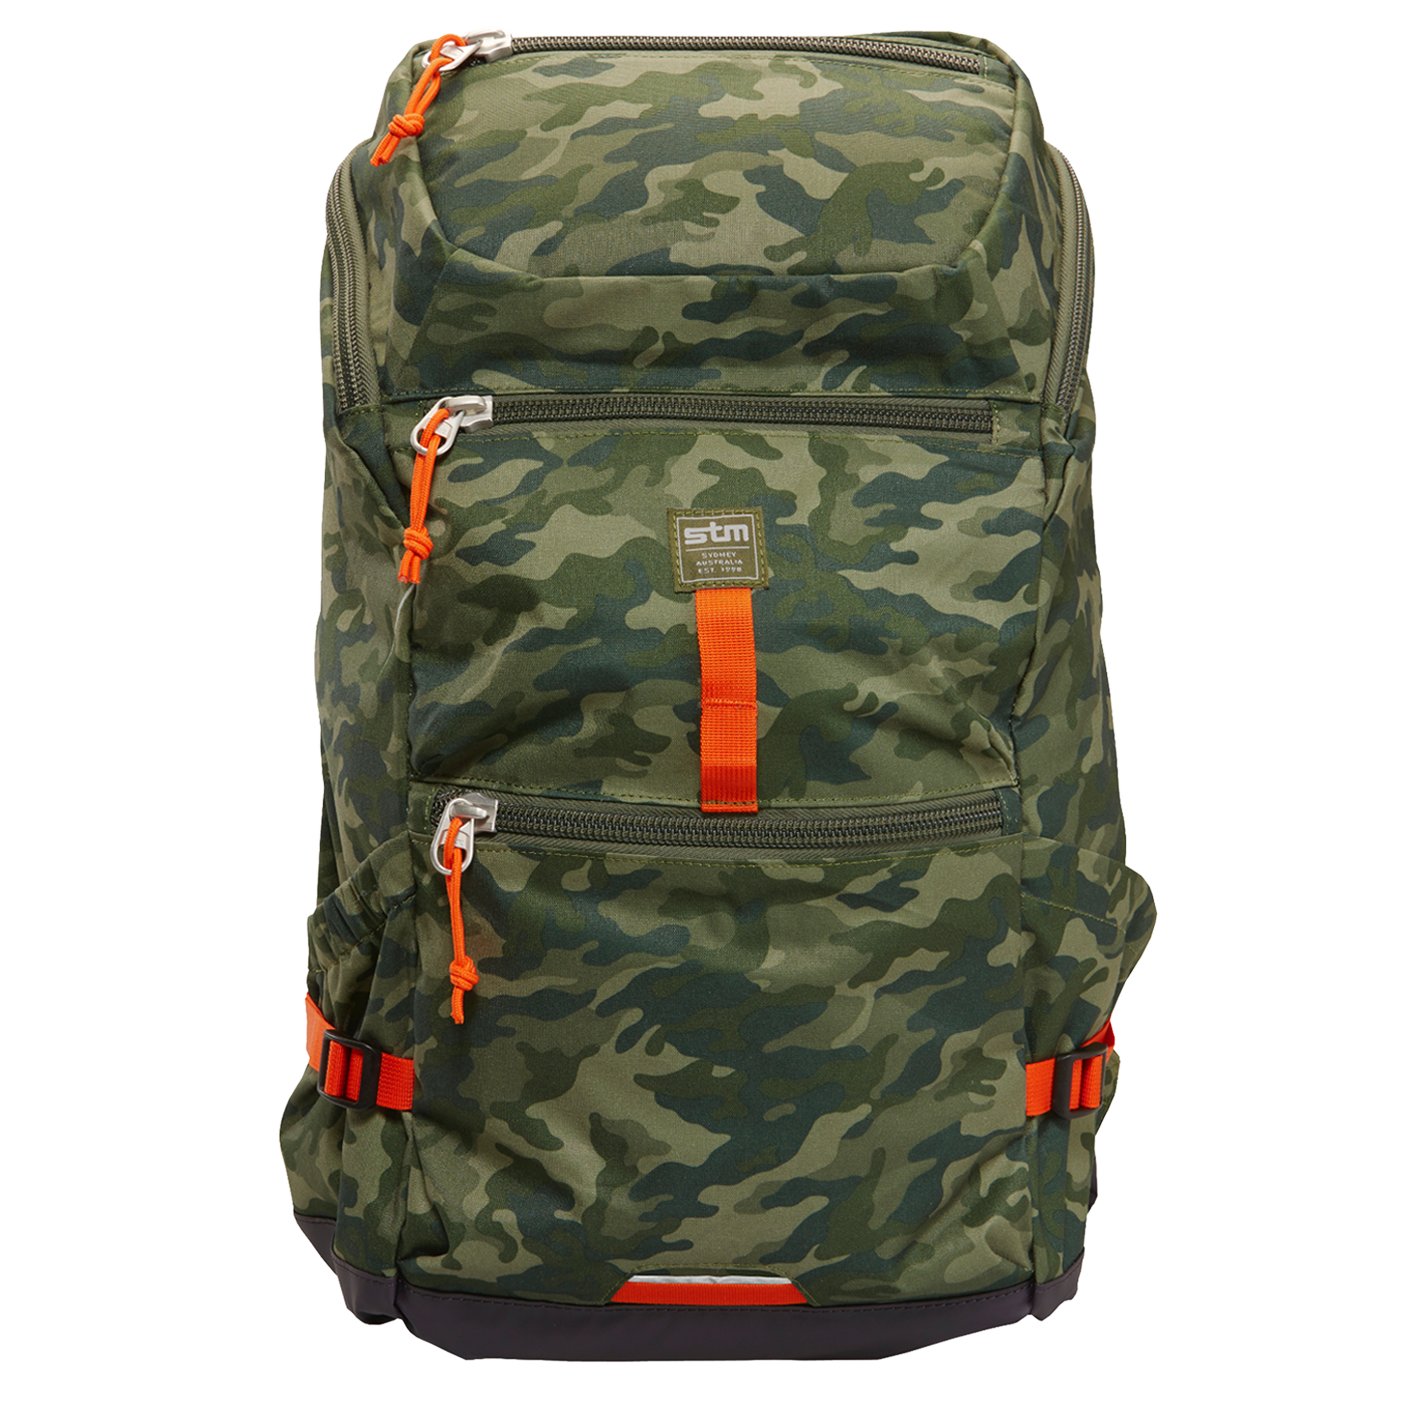 Backpack, camouflage pattern